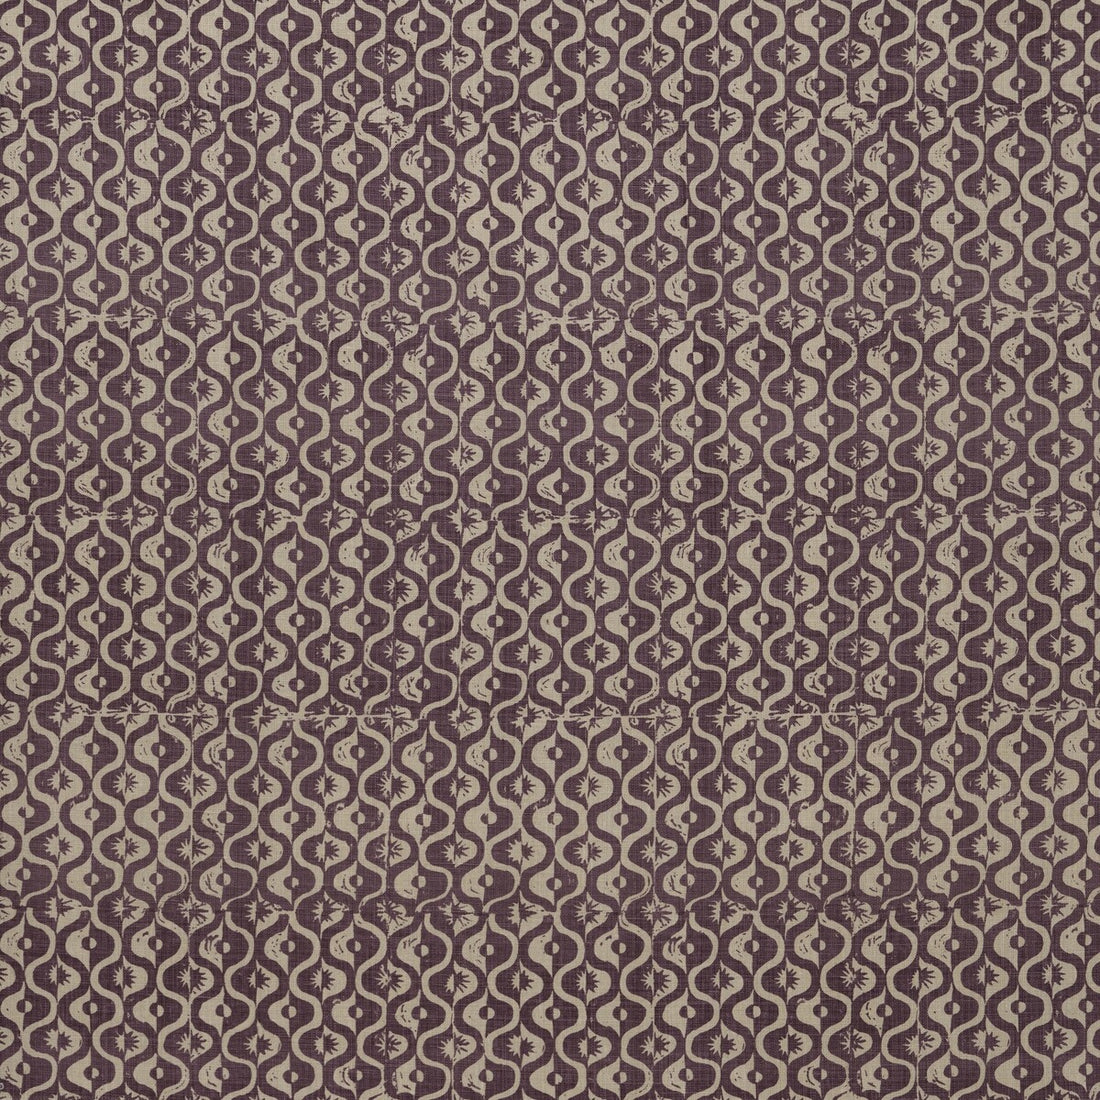 Small Medallion fabric in aubergine color - pattern BFC-3669.909.0 - by Lee Jofa in the Blithfield collection